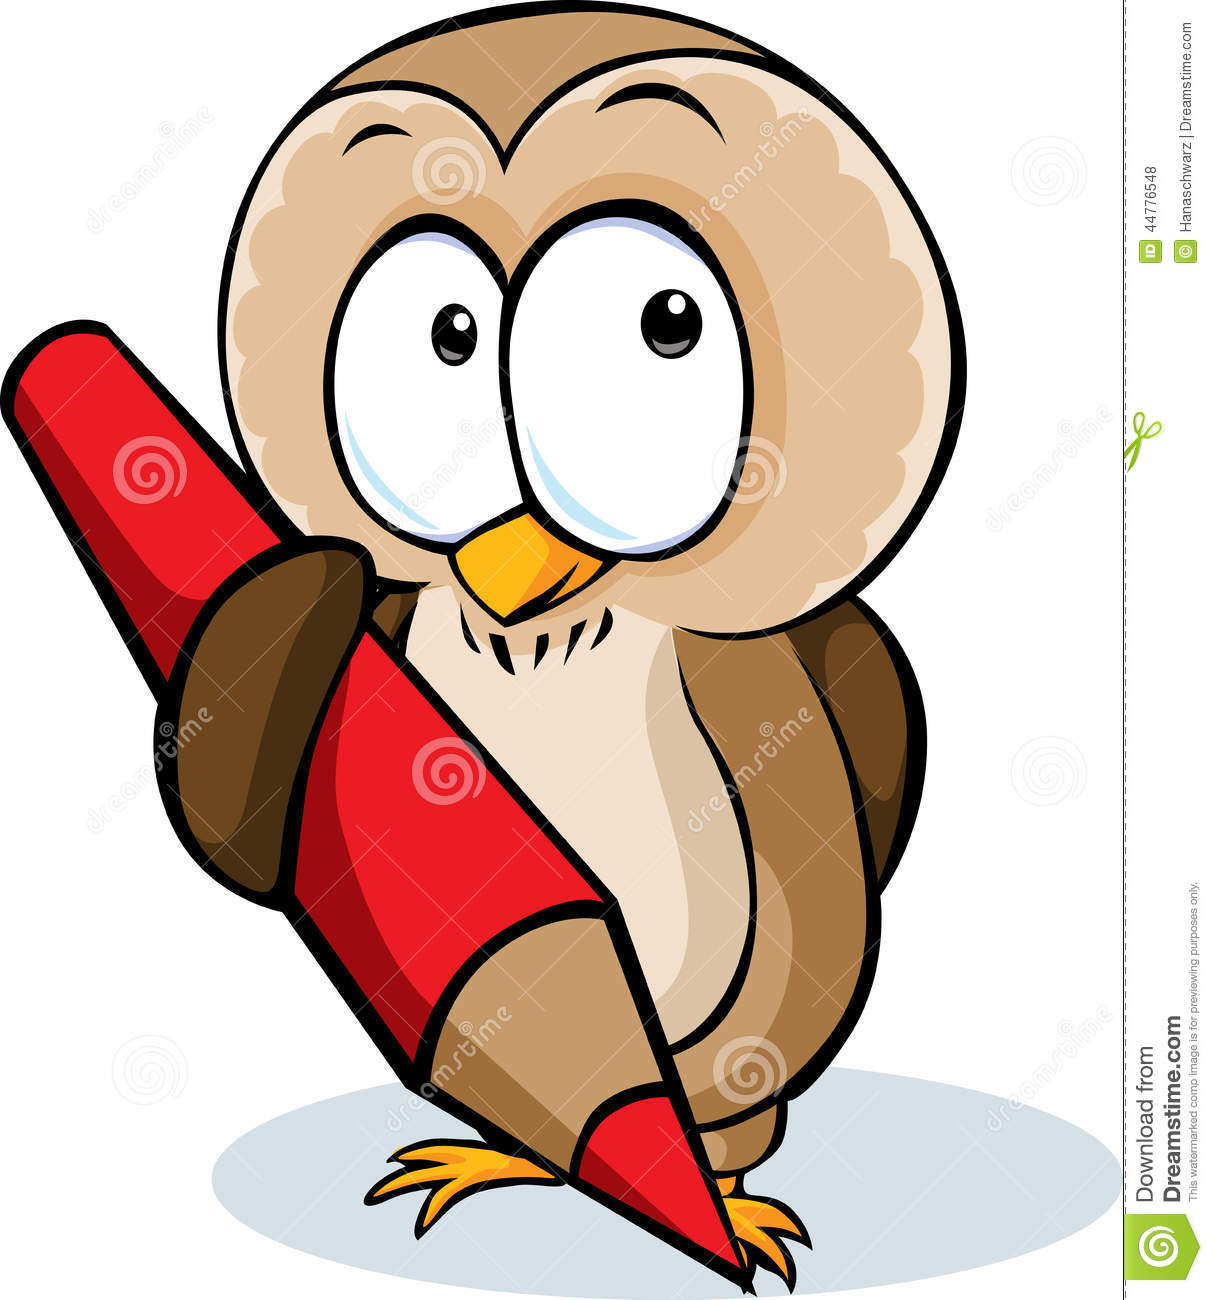 Cute Owl Hold Pencil Cartoon   Vector Illustration Isolated On White